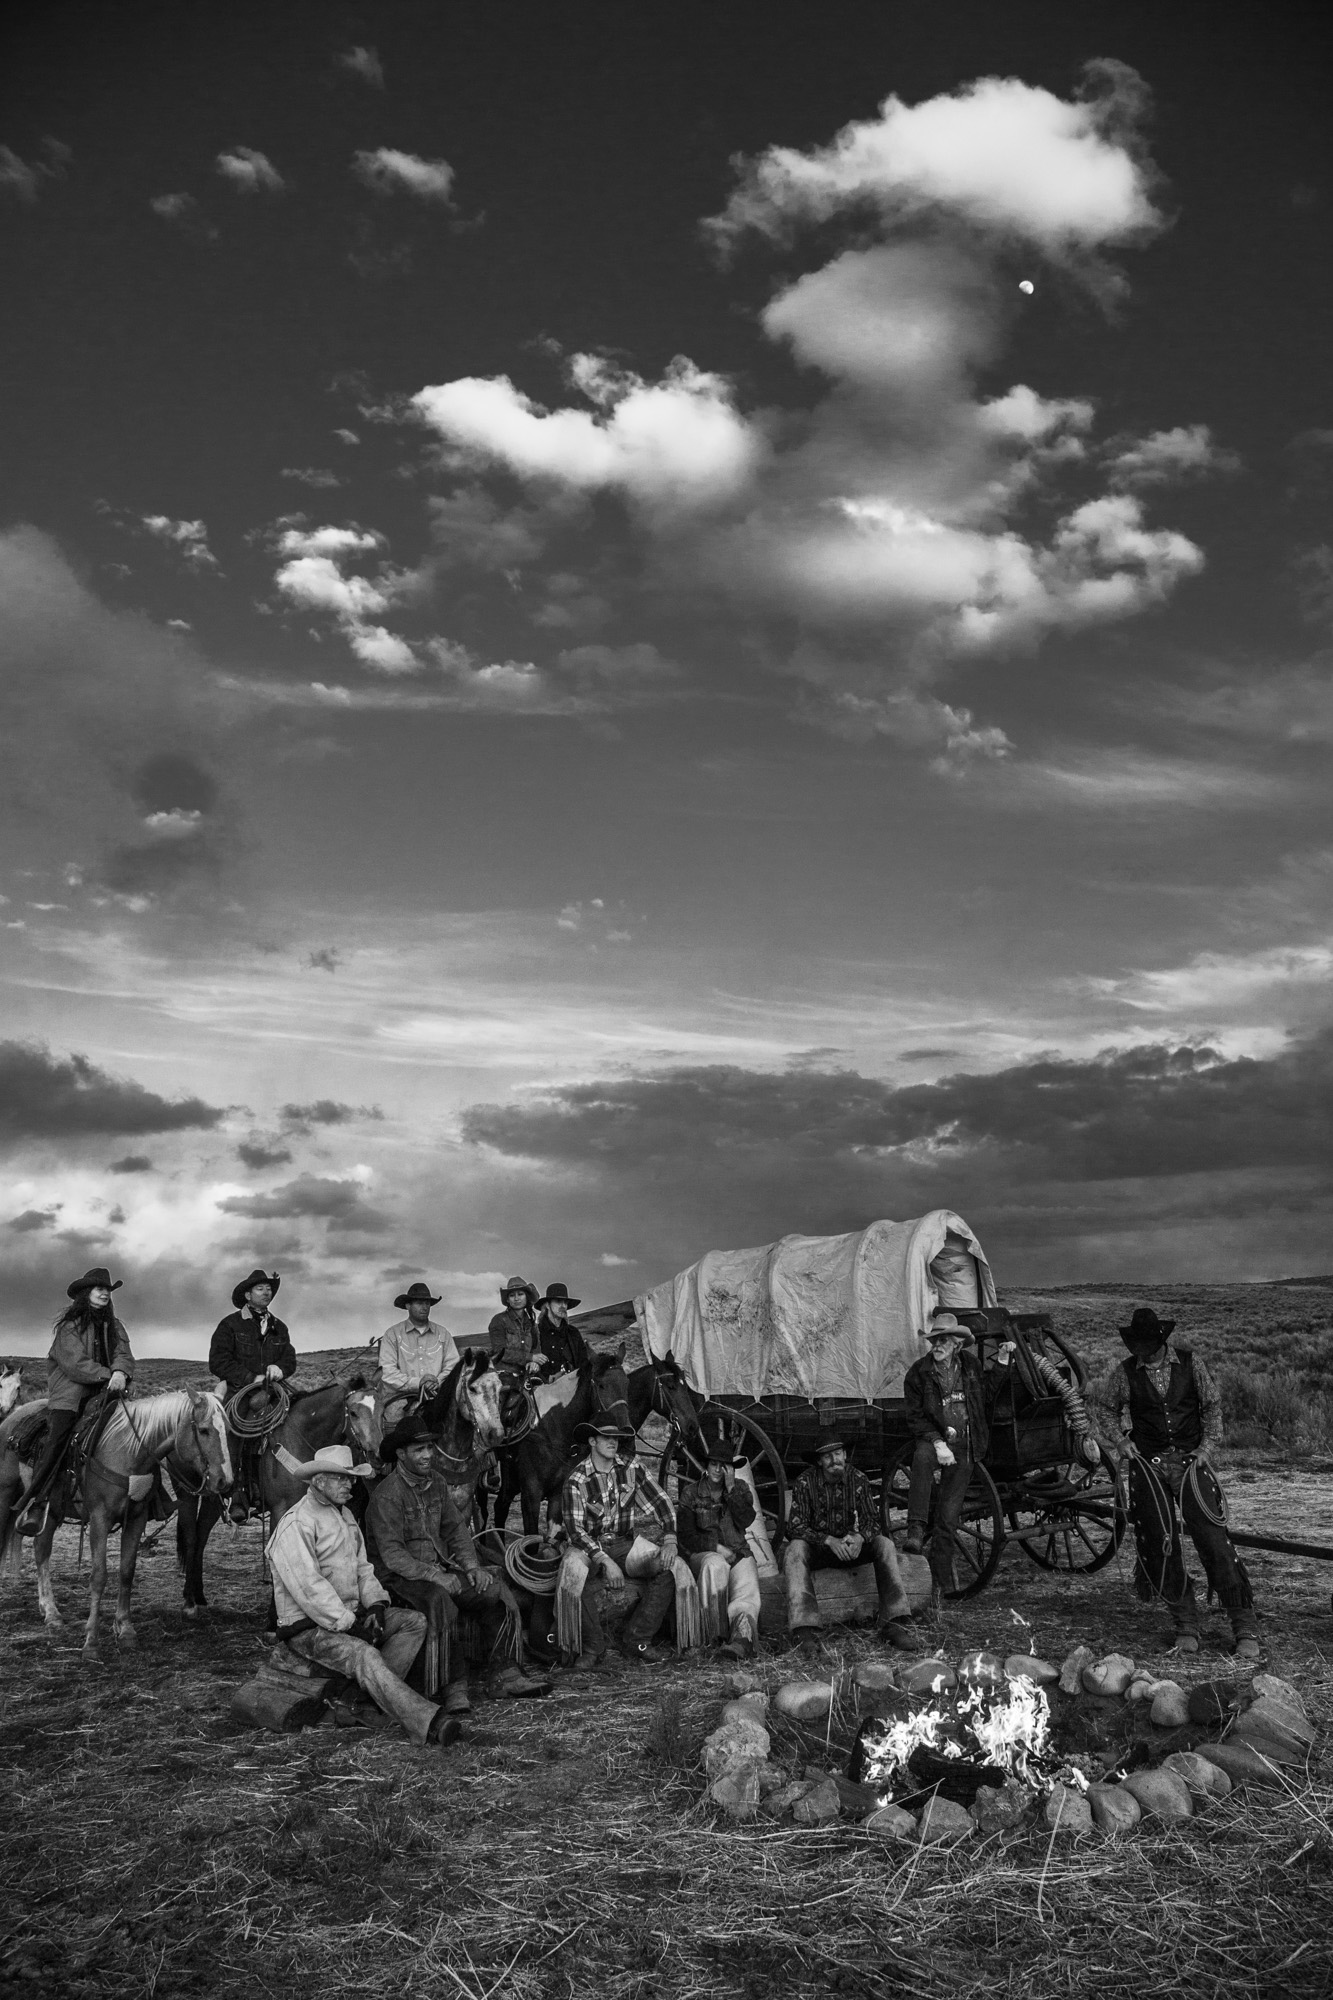 Fine Art Limited Edition Photo Prints of Cowboys, Horses, and life in the West. The Colorado Crew. A Cowboy picture in black...